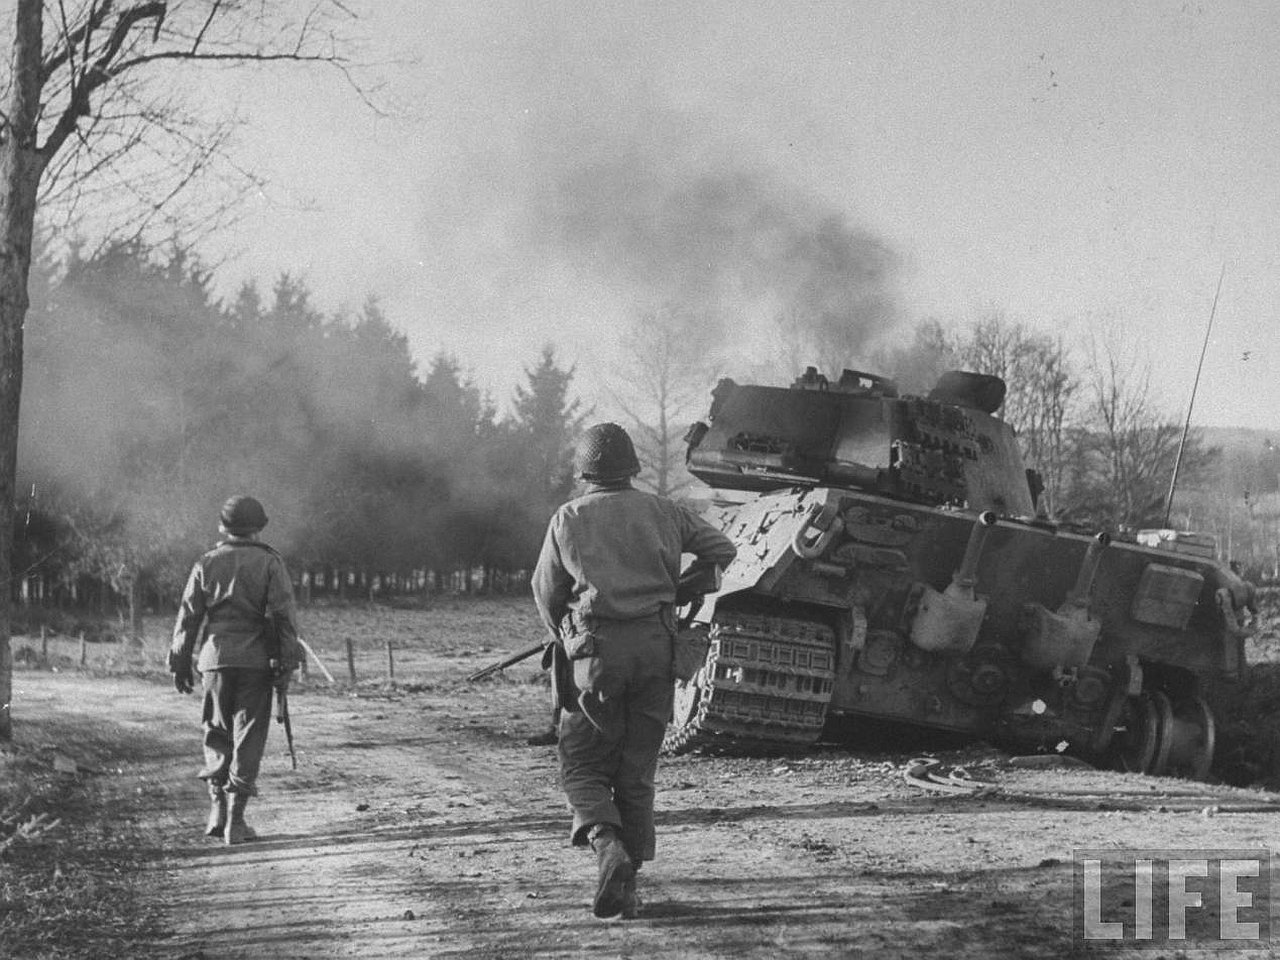 what tanks were used in making battle of the bulge movie